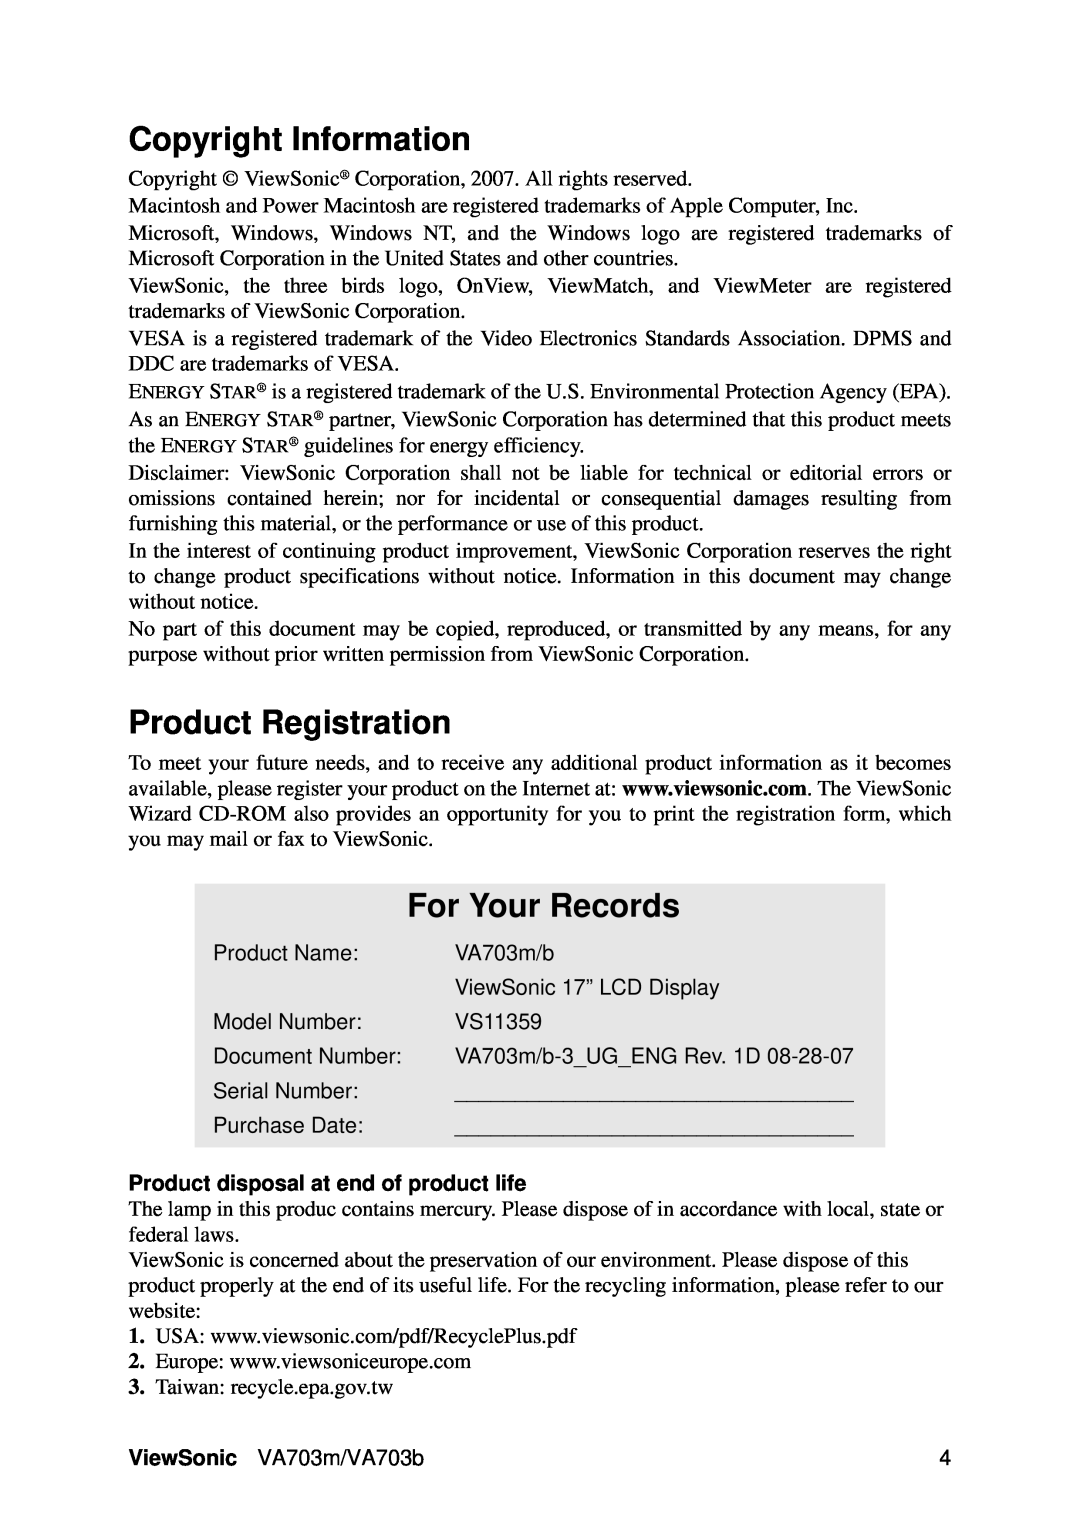 ViewSonic VA703M Copyright Information, Product Registration, For Your Records, Product disposal at end of product life 